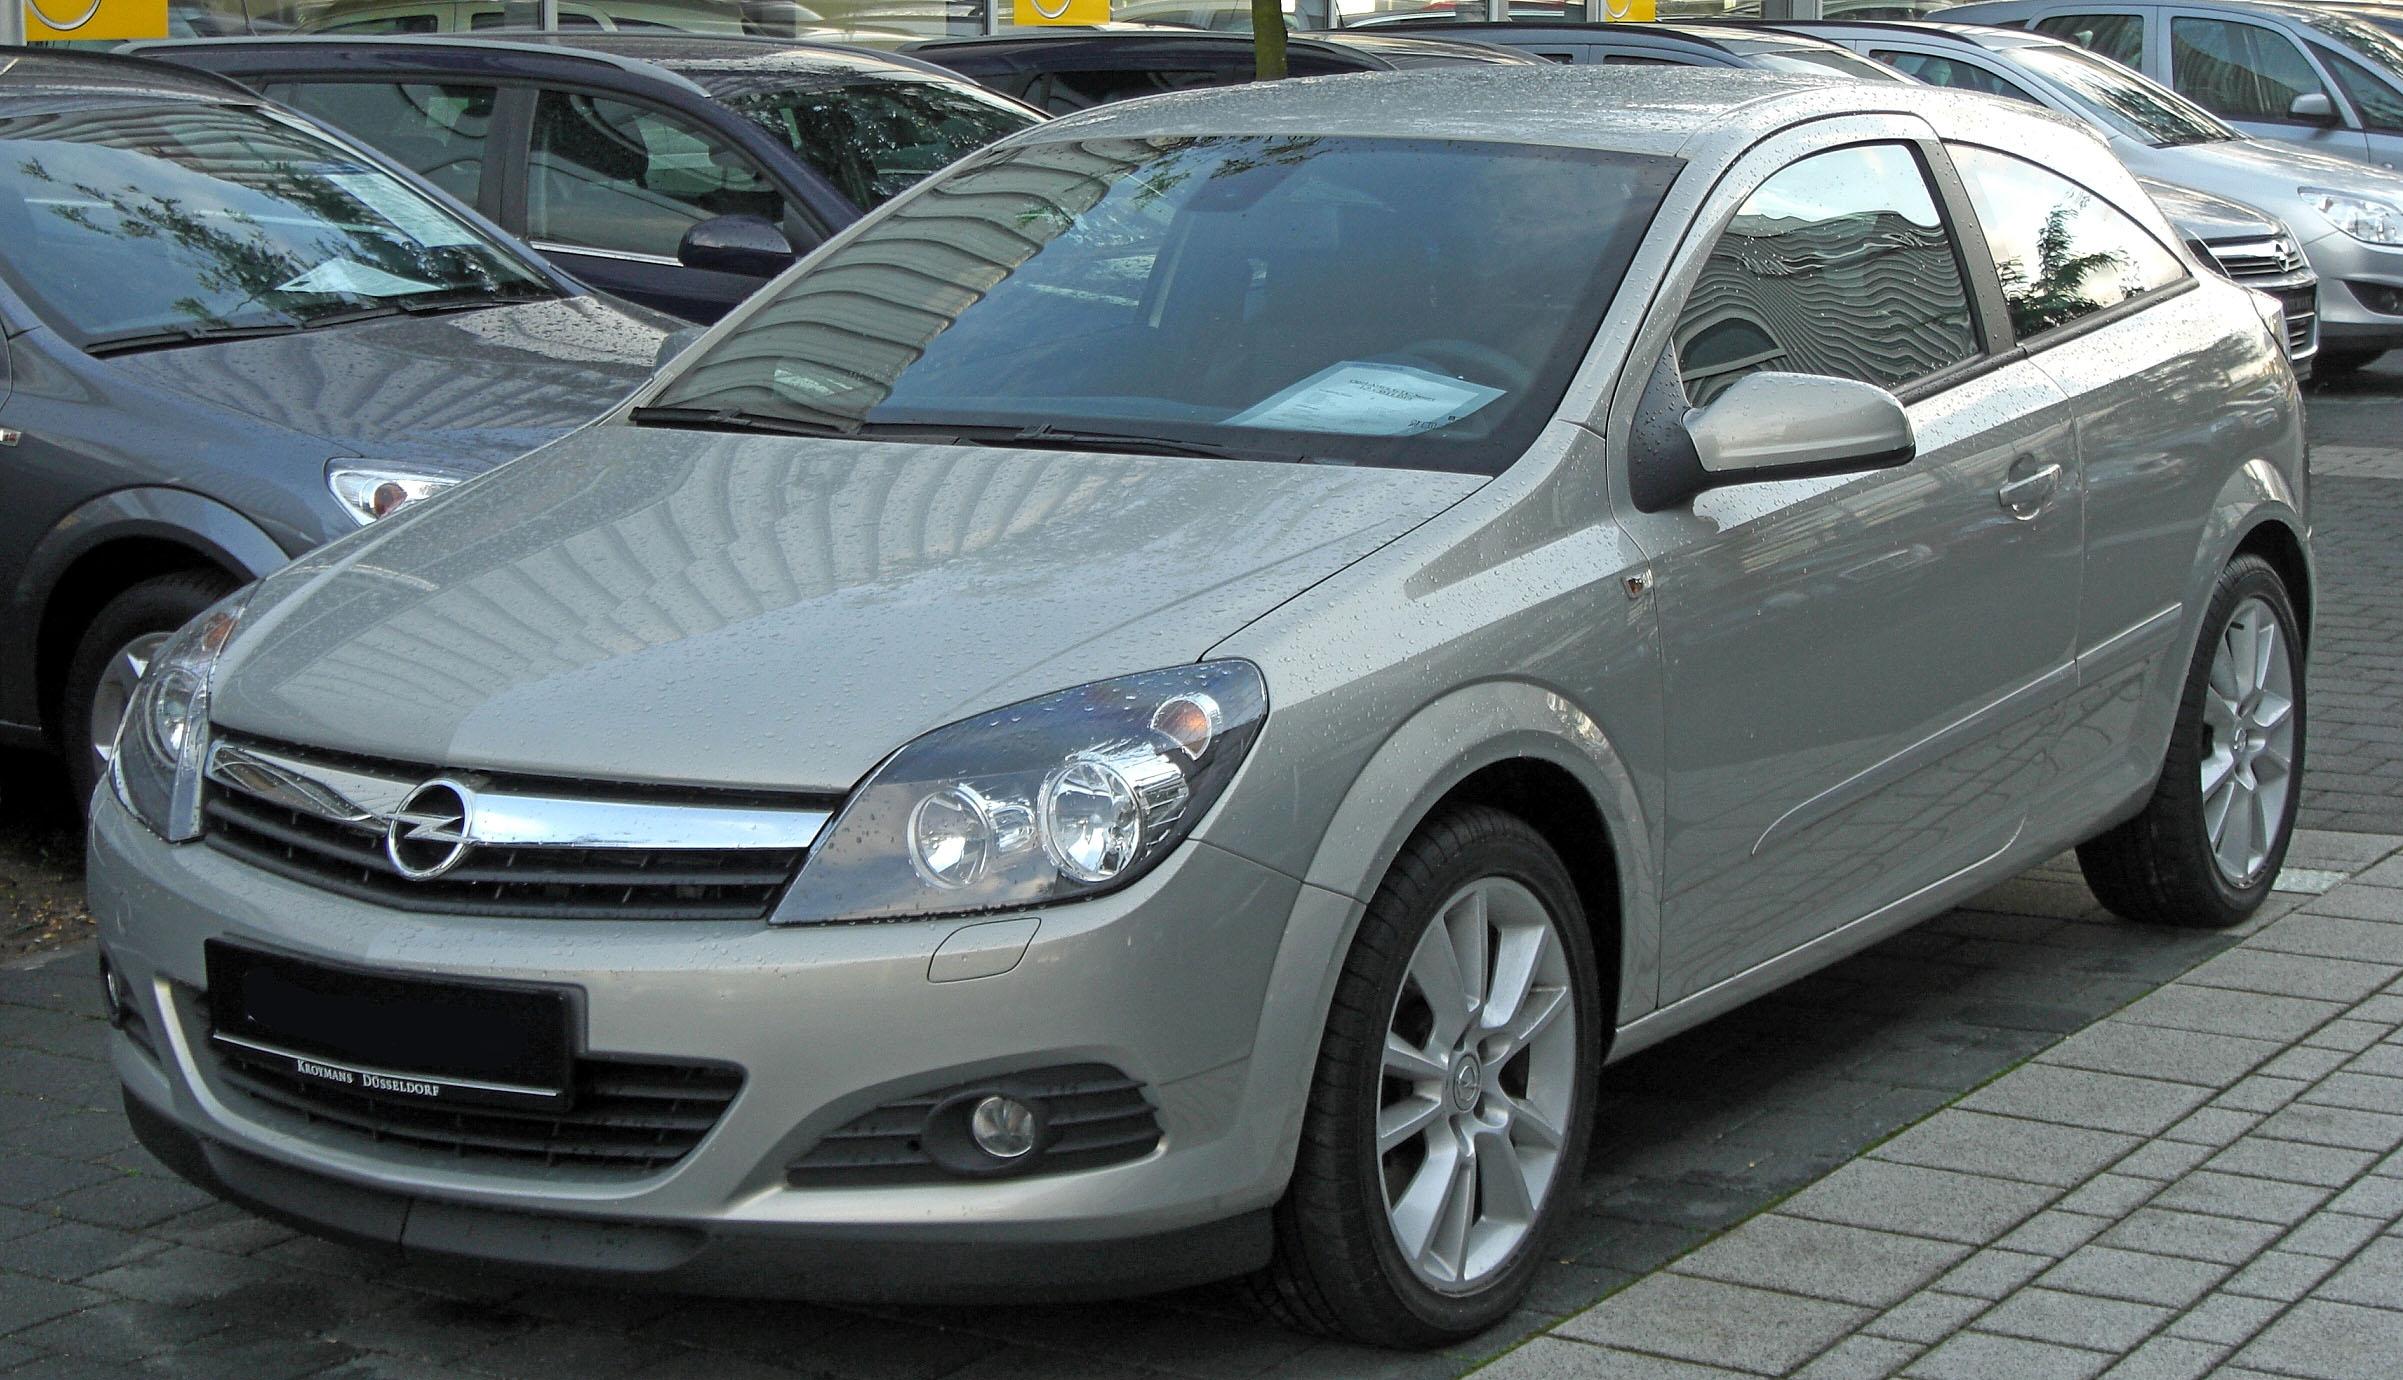 File:Opel Astra H GTC 1.9 CDTI front.JPG - Wikimedia Commons